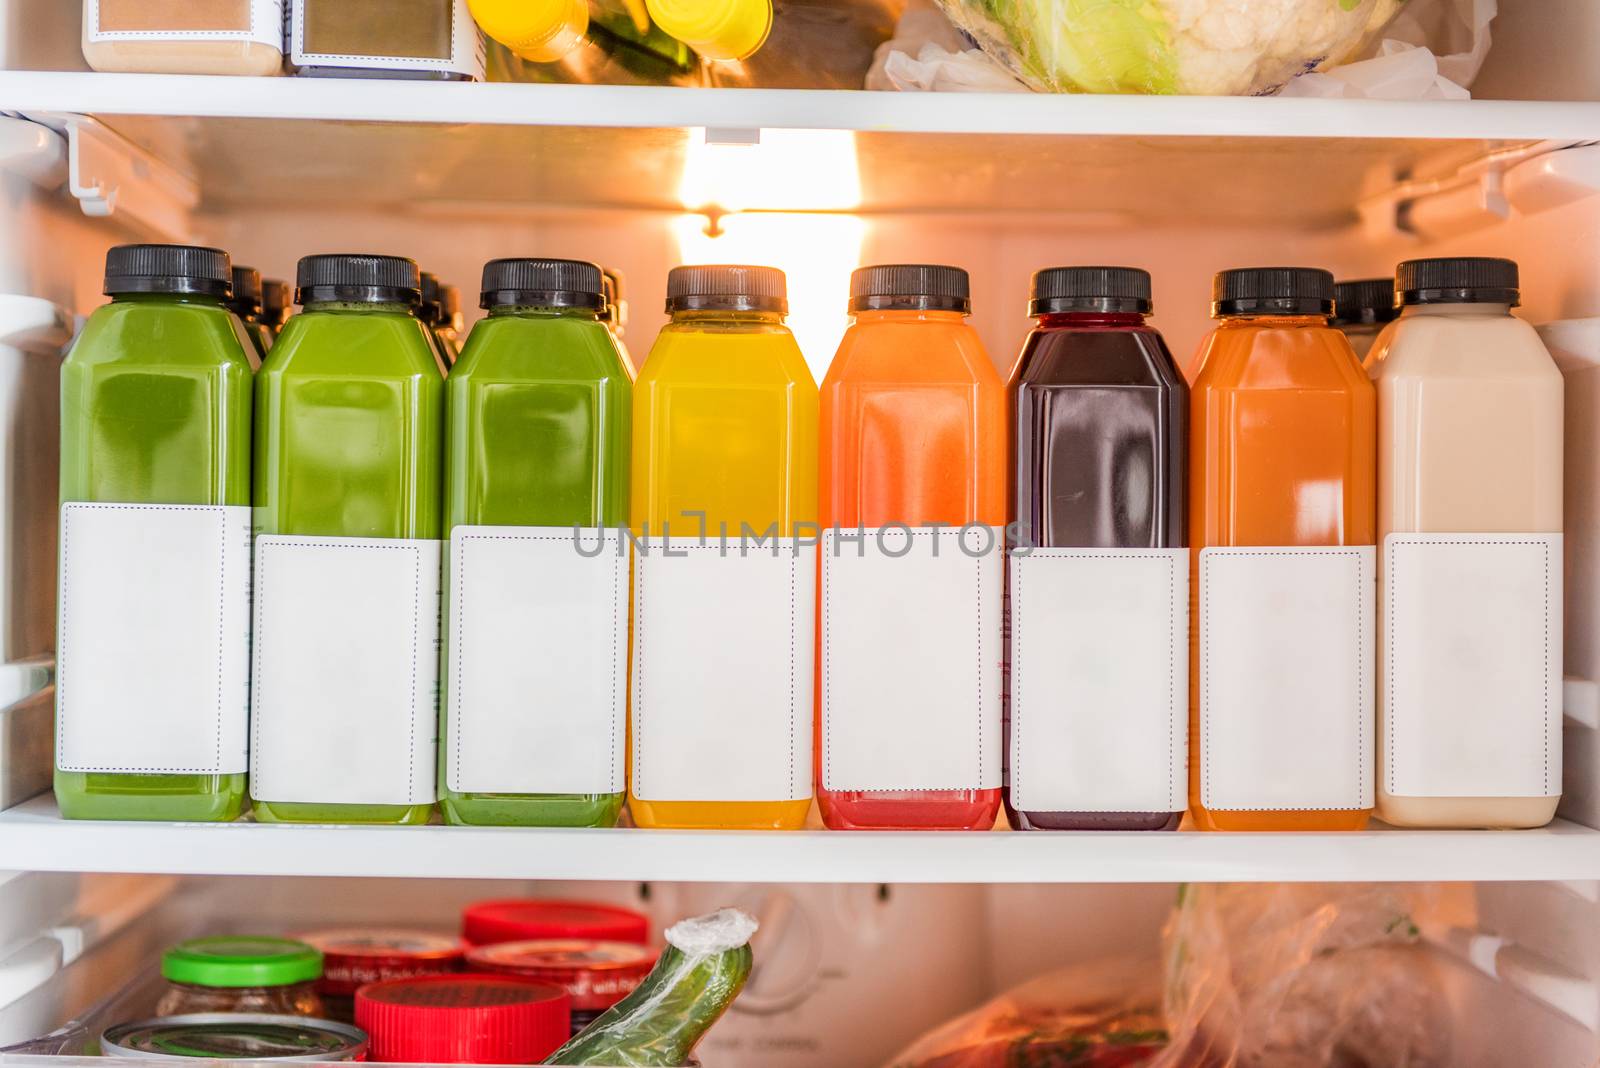 Juicing cold pressed vegetable juices for a detox cleanse diet. Dieting bydrinking organic fruits and vegetables juice made fresh and delivered in bottles at home in fridge by Maridav